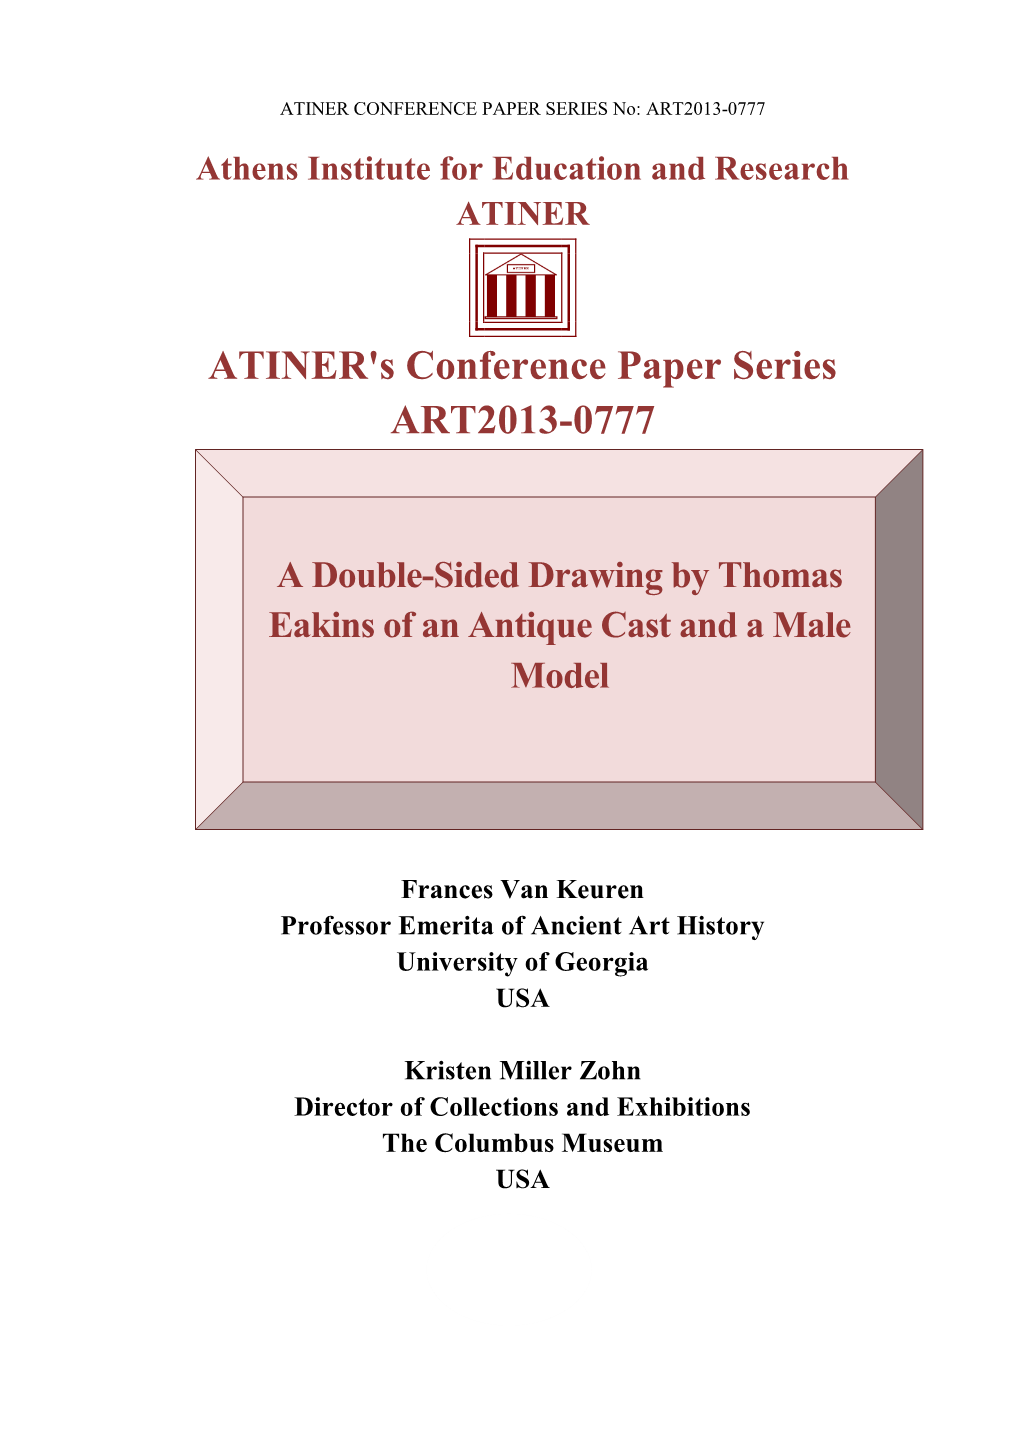 ATINER's Conference Paper Series ART2013-0777